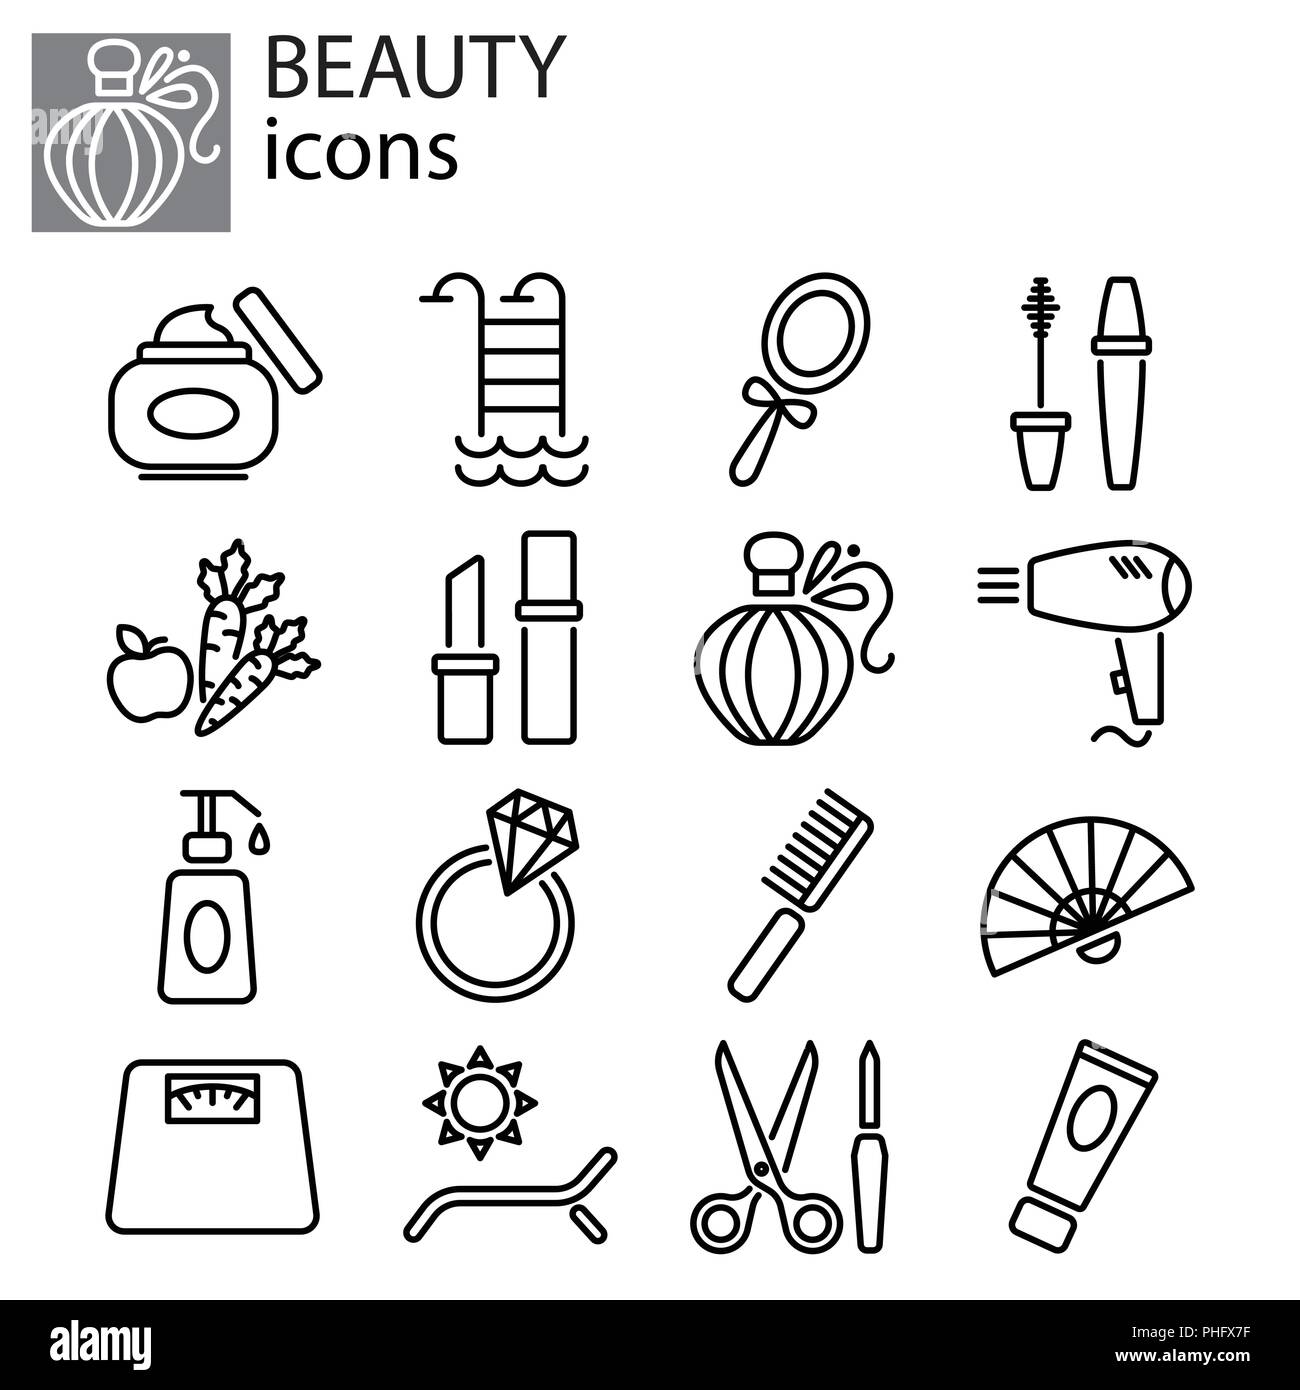 Web icons set. Beauty, fashion and makeup Stock Vector